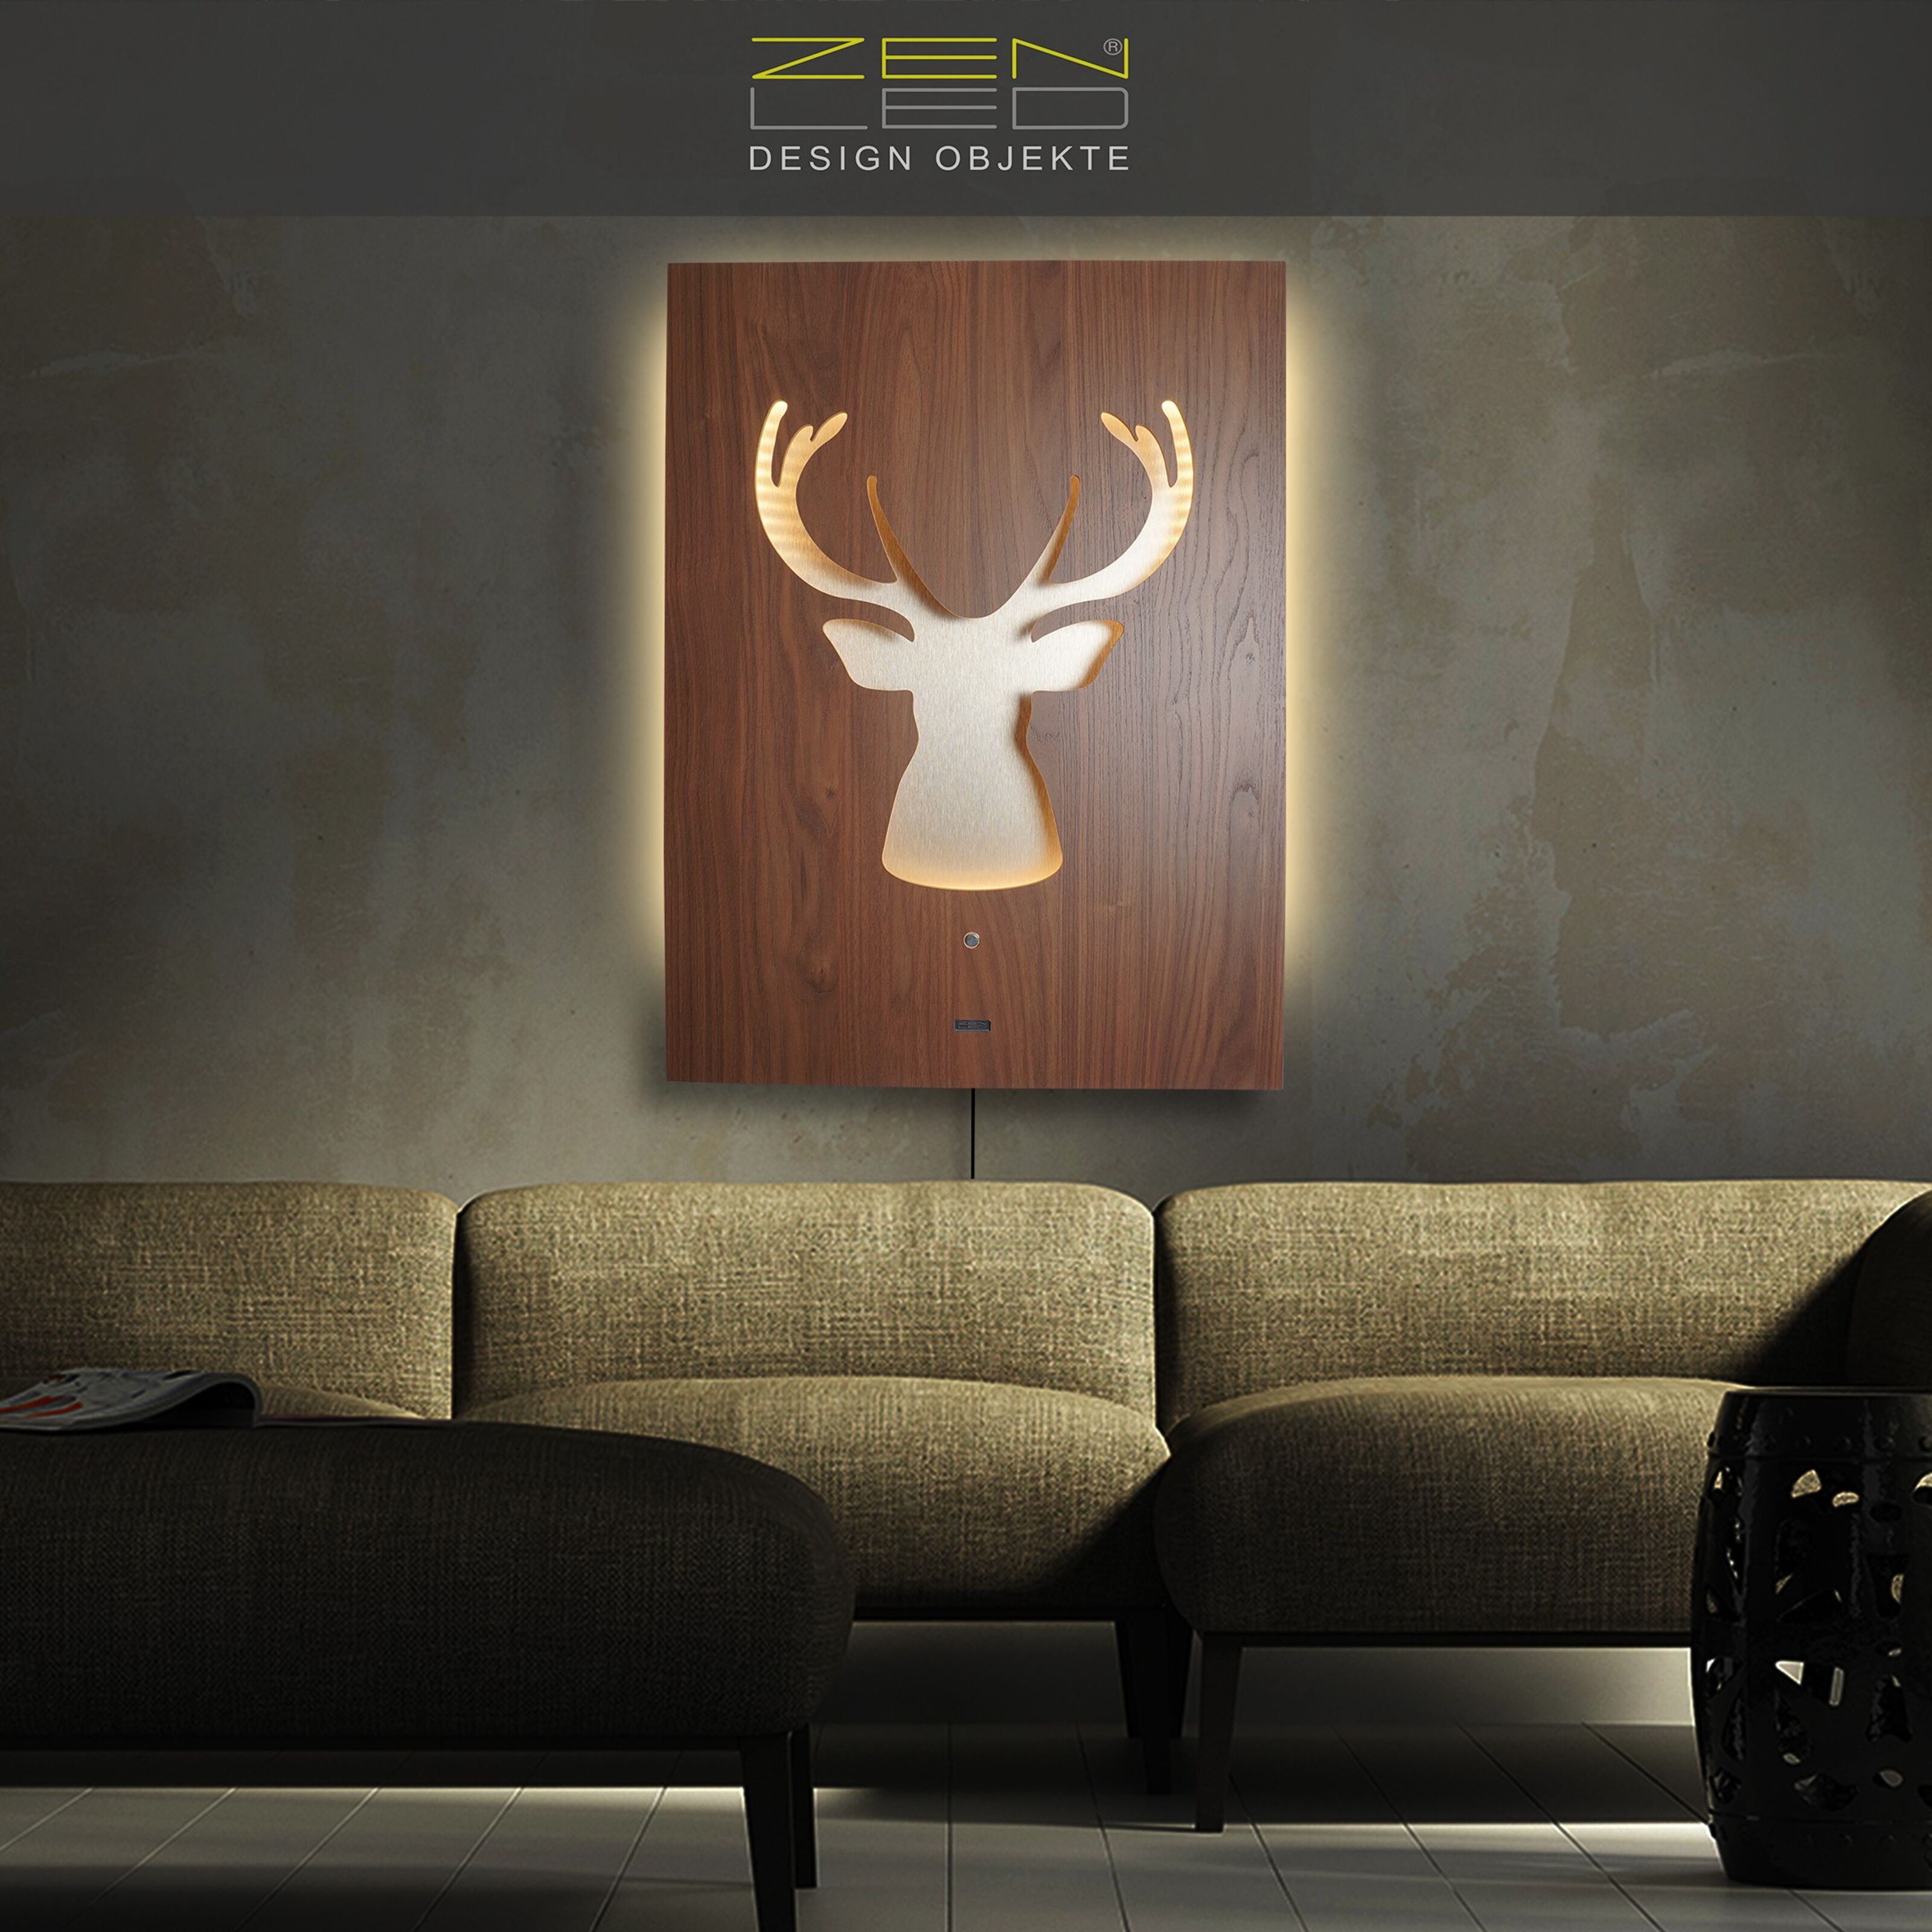 Buy wholesale LED country in 60x80cm, plate model aluminum wood mural walnut-brown rustic in 3D wood illuminated on sculpture, antler deer look illuminated champagne, head light \